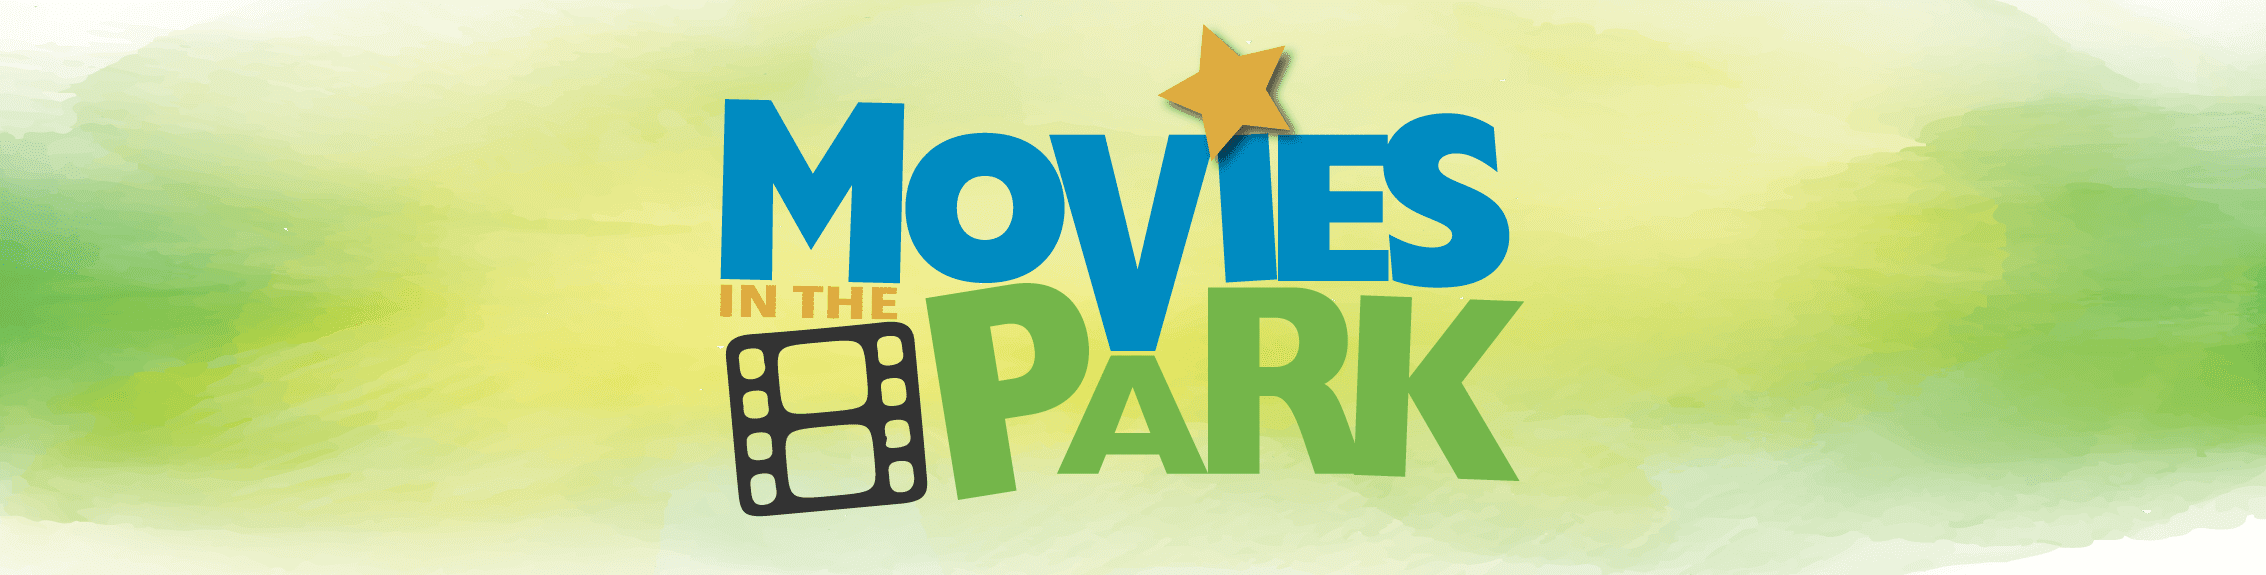 Cobourg Movies in the Park Logo block